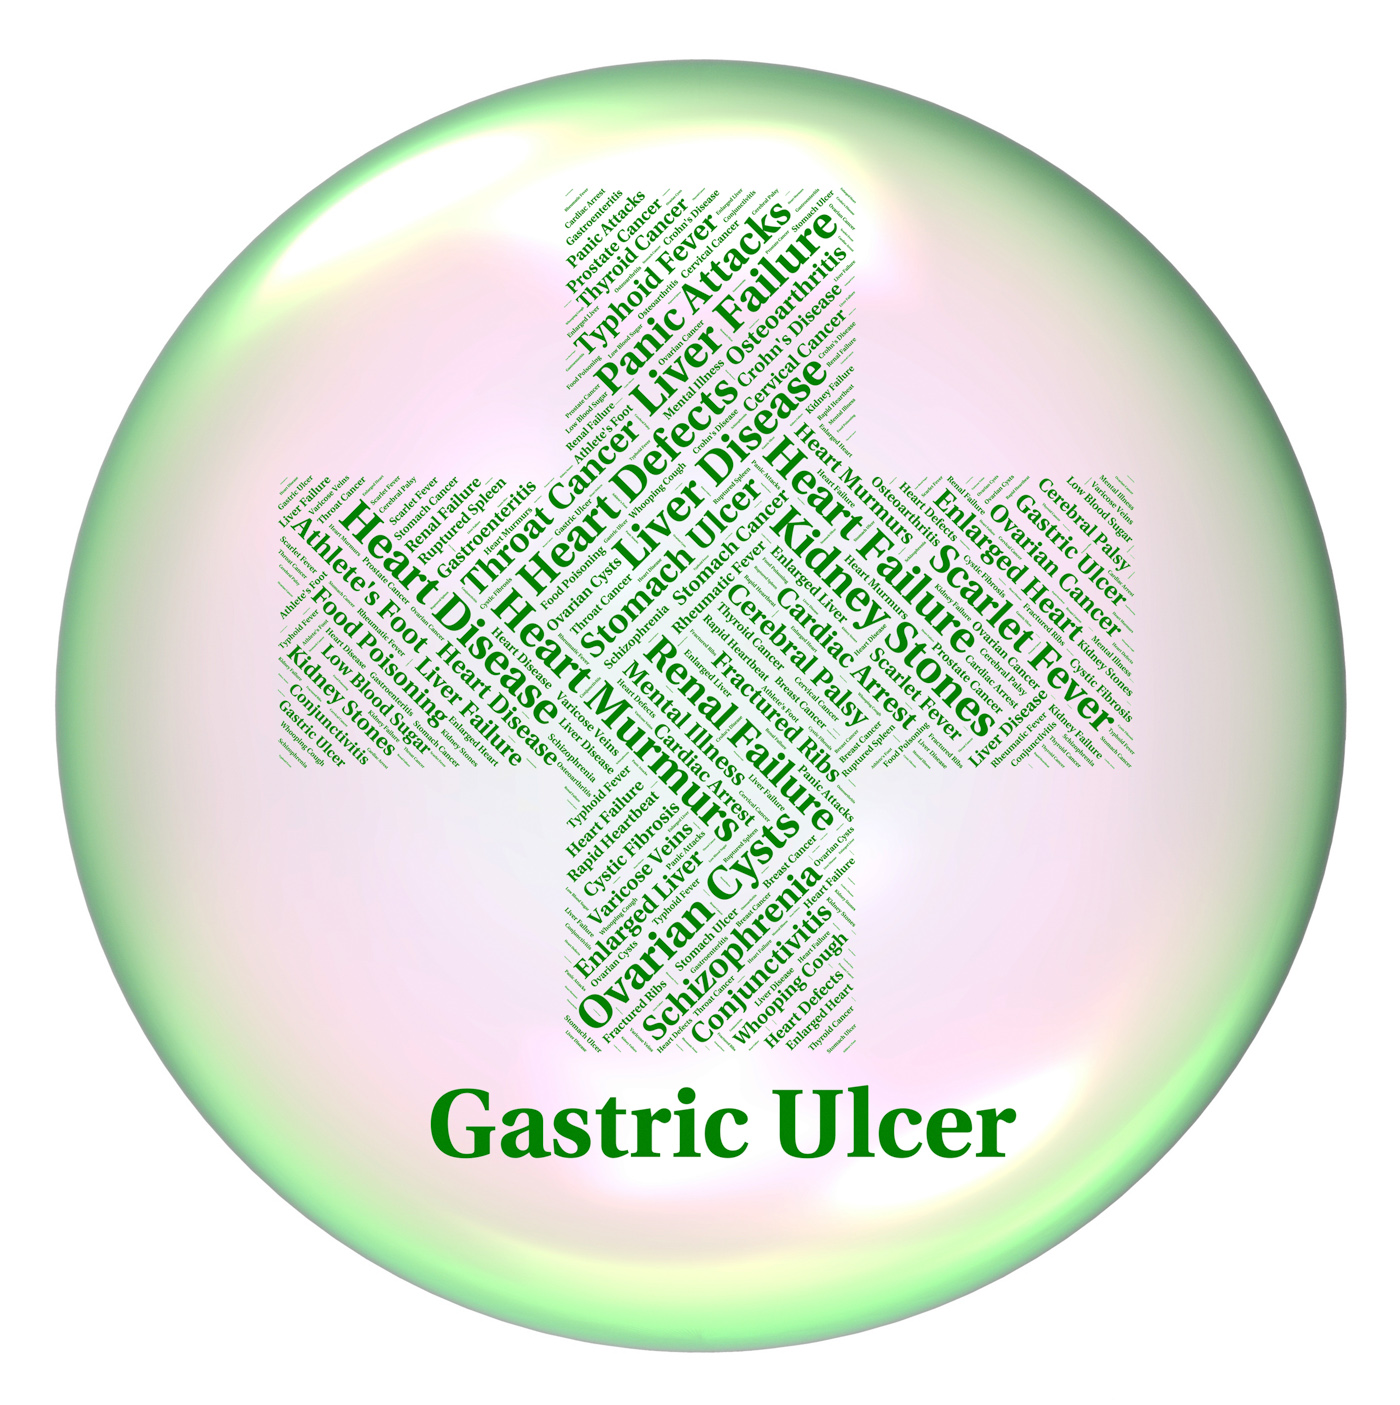 Gastric ulcer means open sore and cyst photo